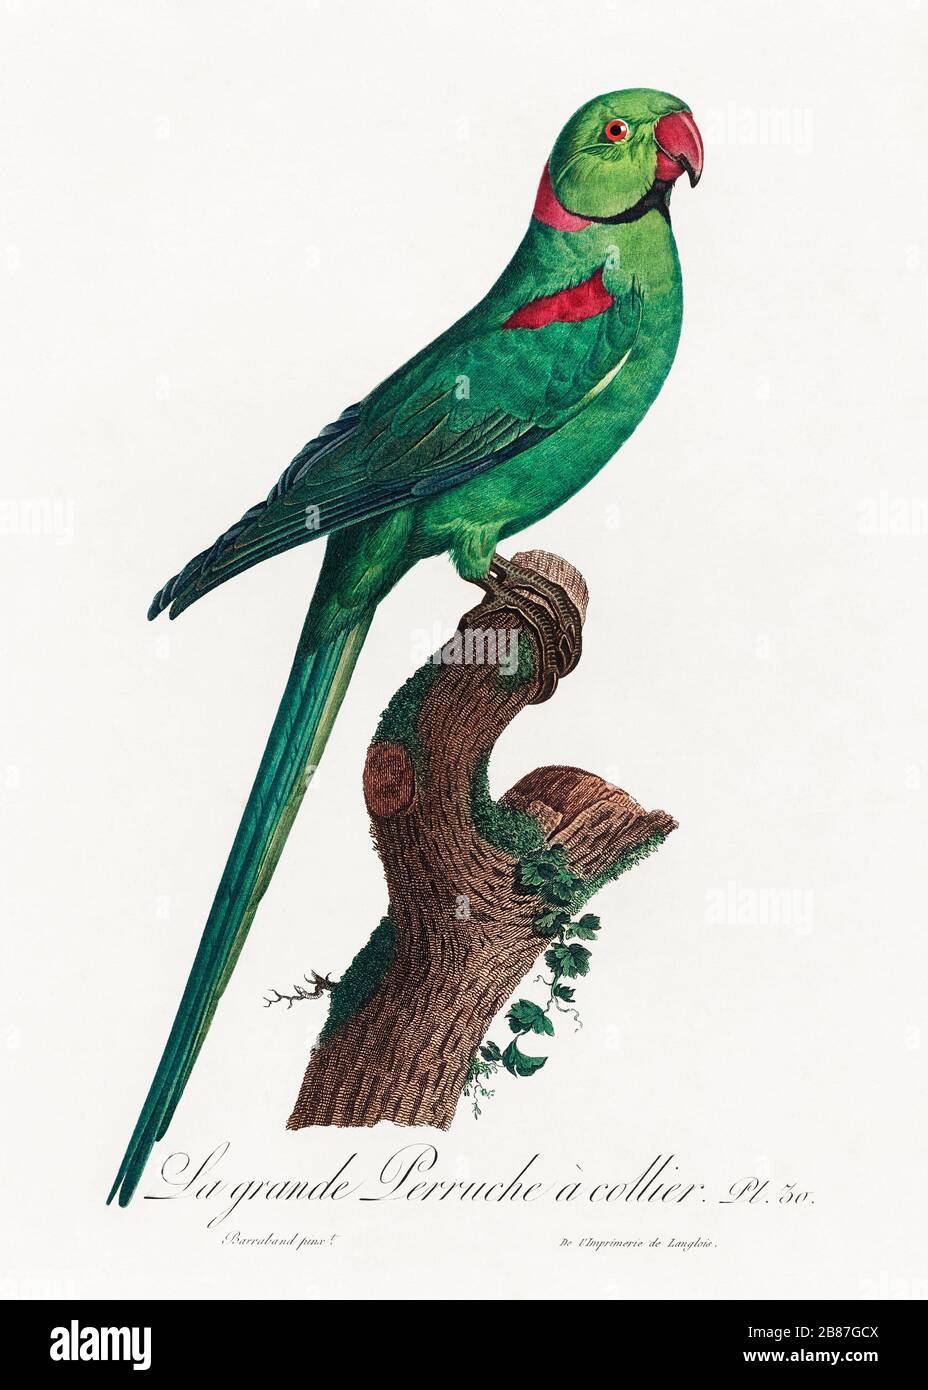 Download free photo of Drawing parrot, drawing perico, parrot mexican, ave,  exotic birds pictures - from needpix.com